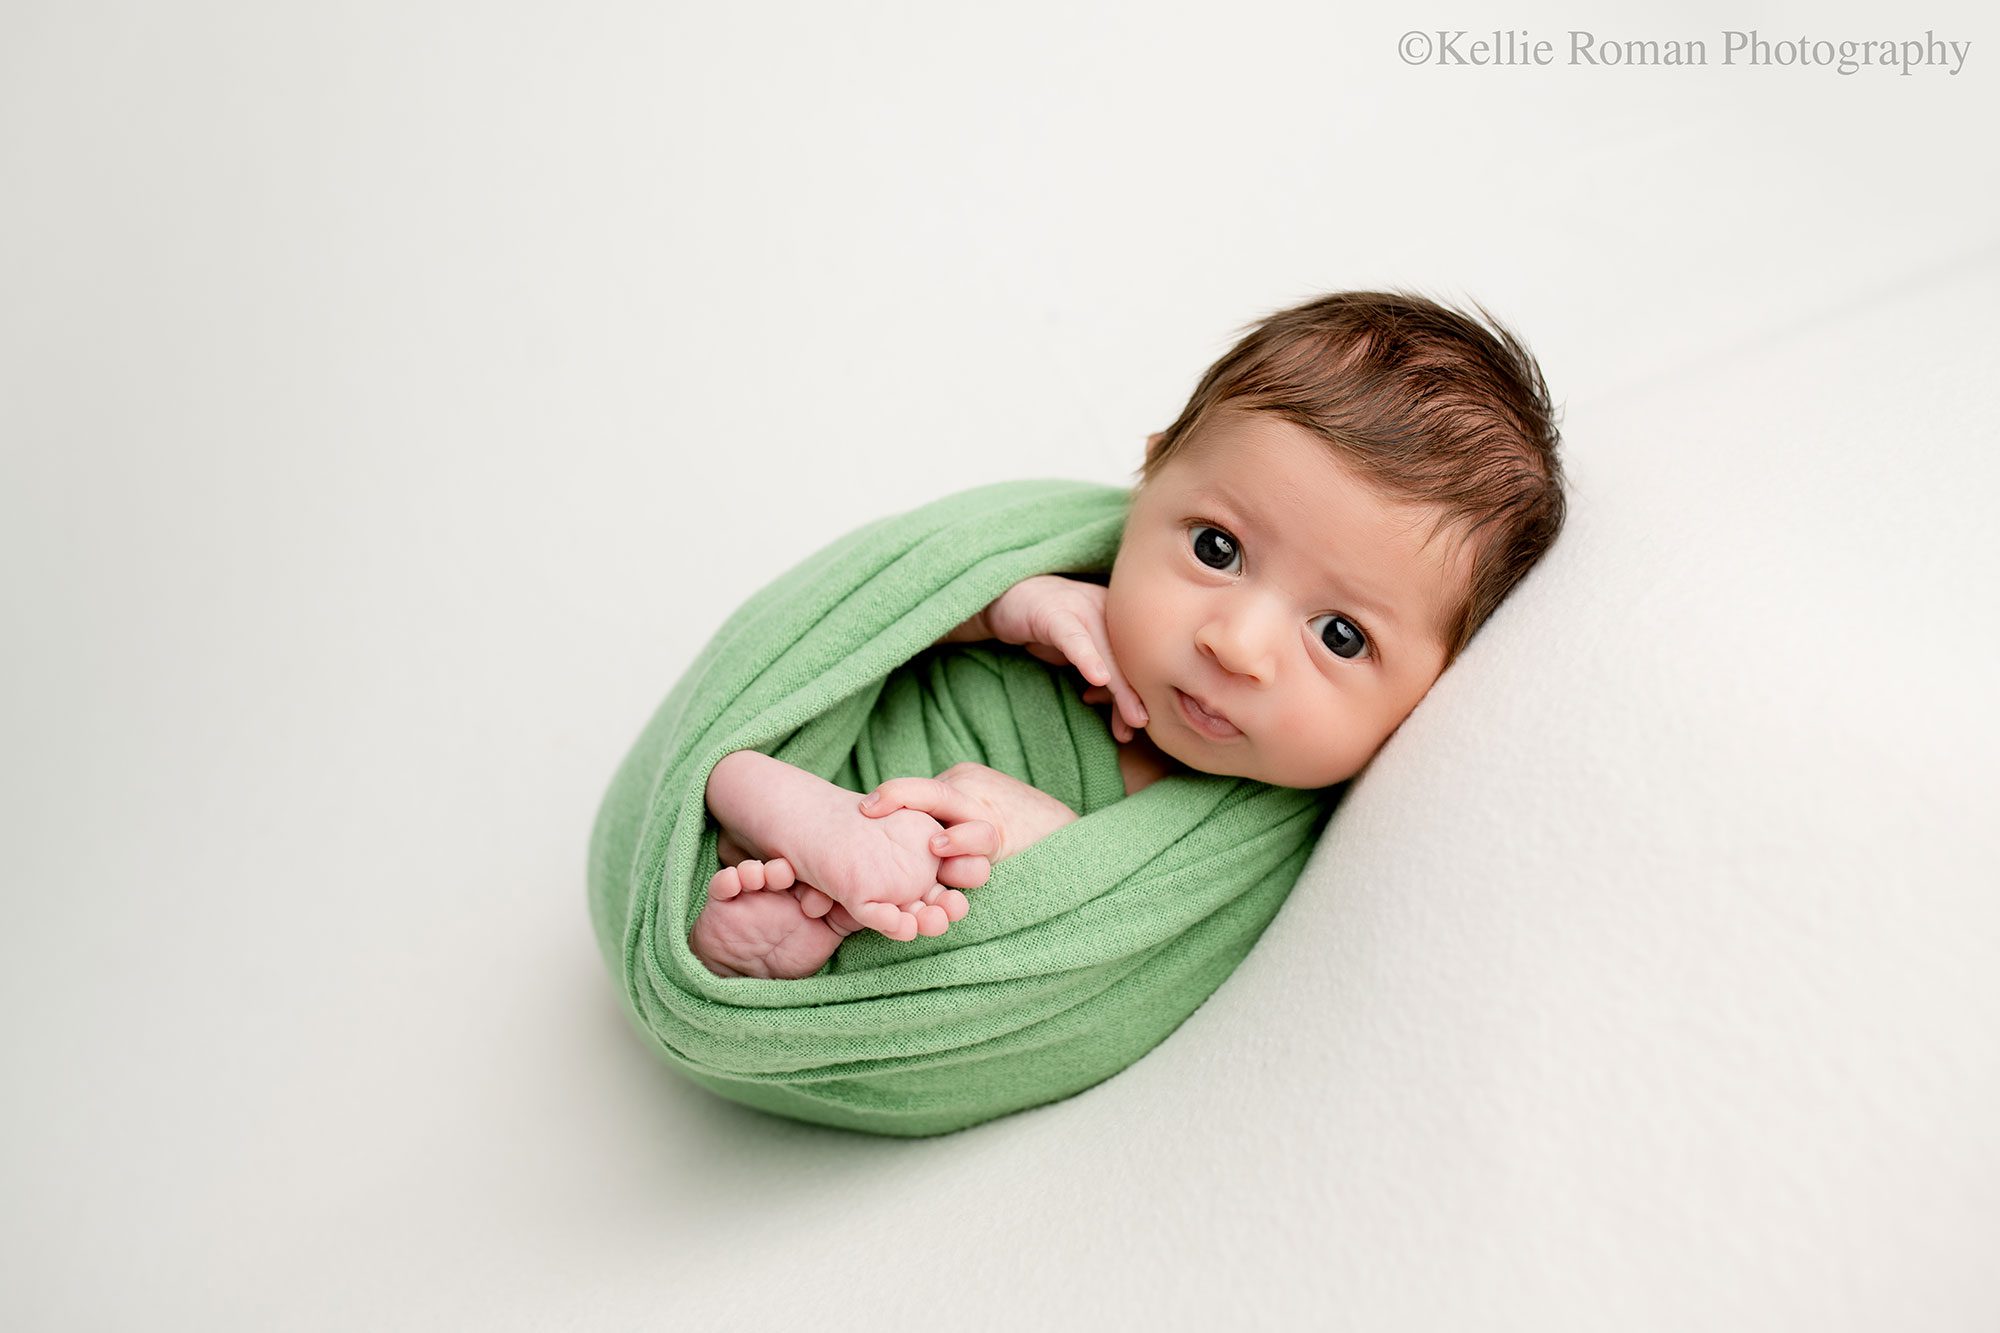 newborn photographer in milwaukee. a newborn boy is wrapped in a green swaddle with his feet and hands sticking out. he has brown hair and big round brown eyes that are open and looking right at the camera. he's on top of a cream colored fabric.